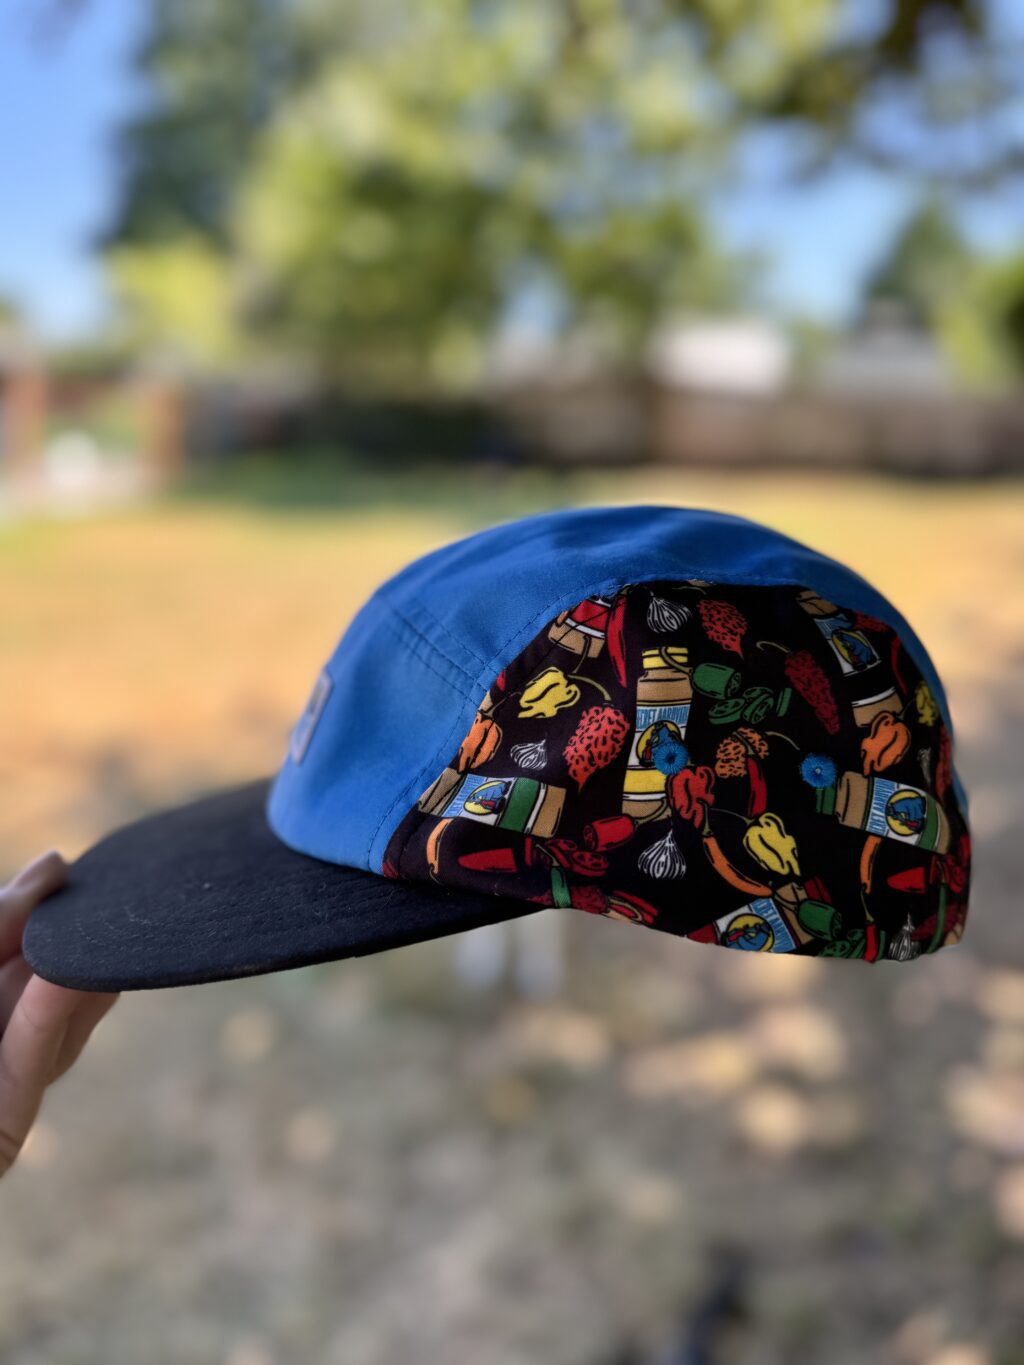 side profile of new side panel camper hat. Hat is blue in the middle, black bill and side panel fabric is bottles of secret aardvark artwork with peppers